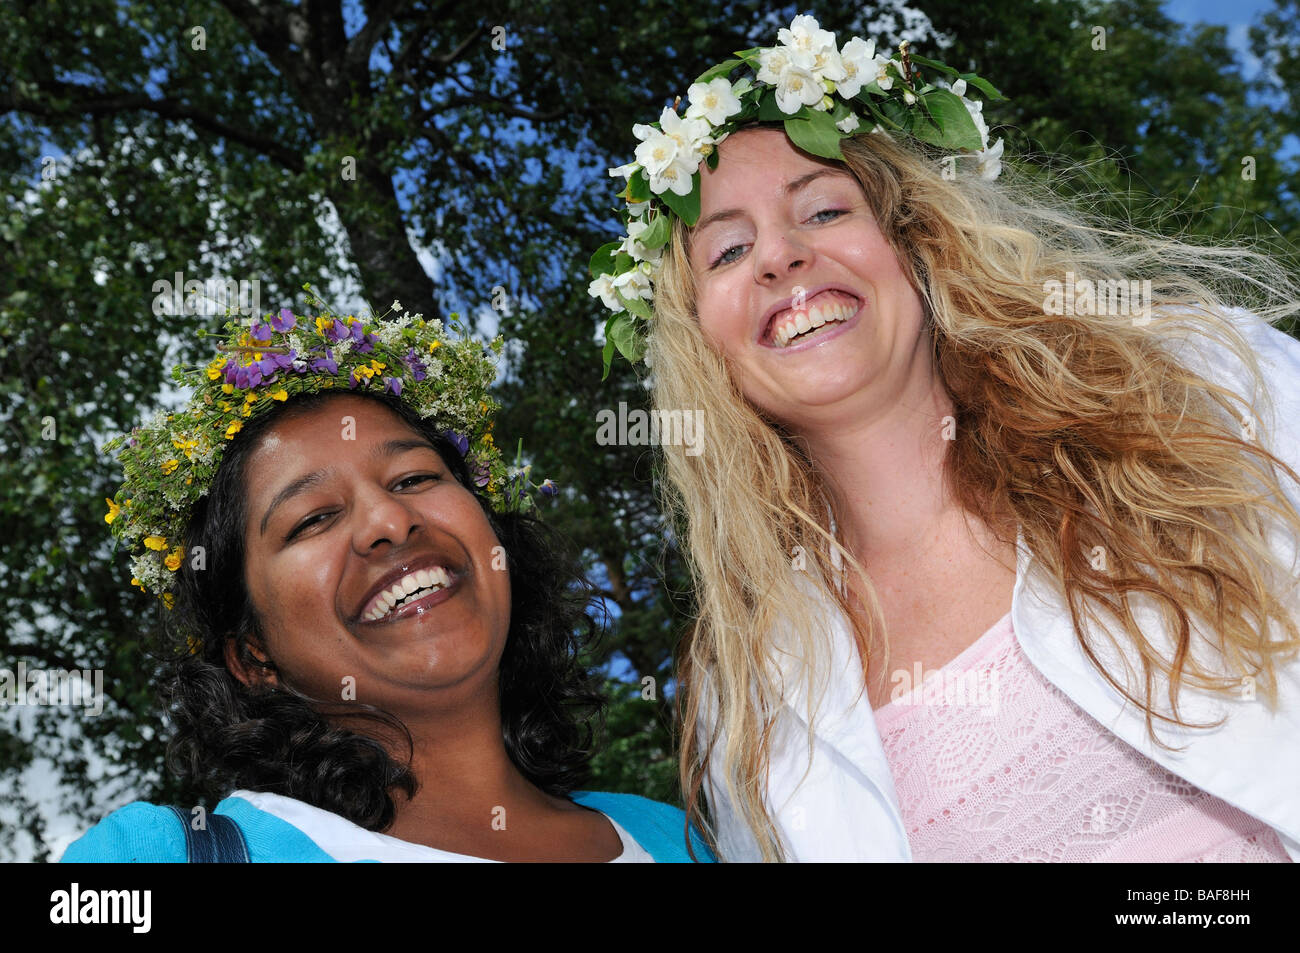 Smiling women with floral wreath at Midsummer celebration in Doessberget Sweden June 2008 Stock Photo